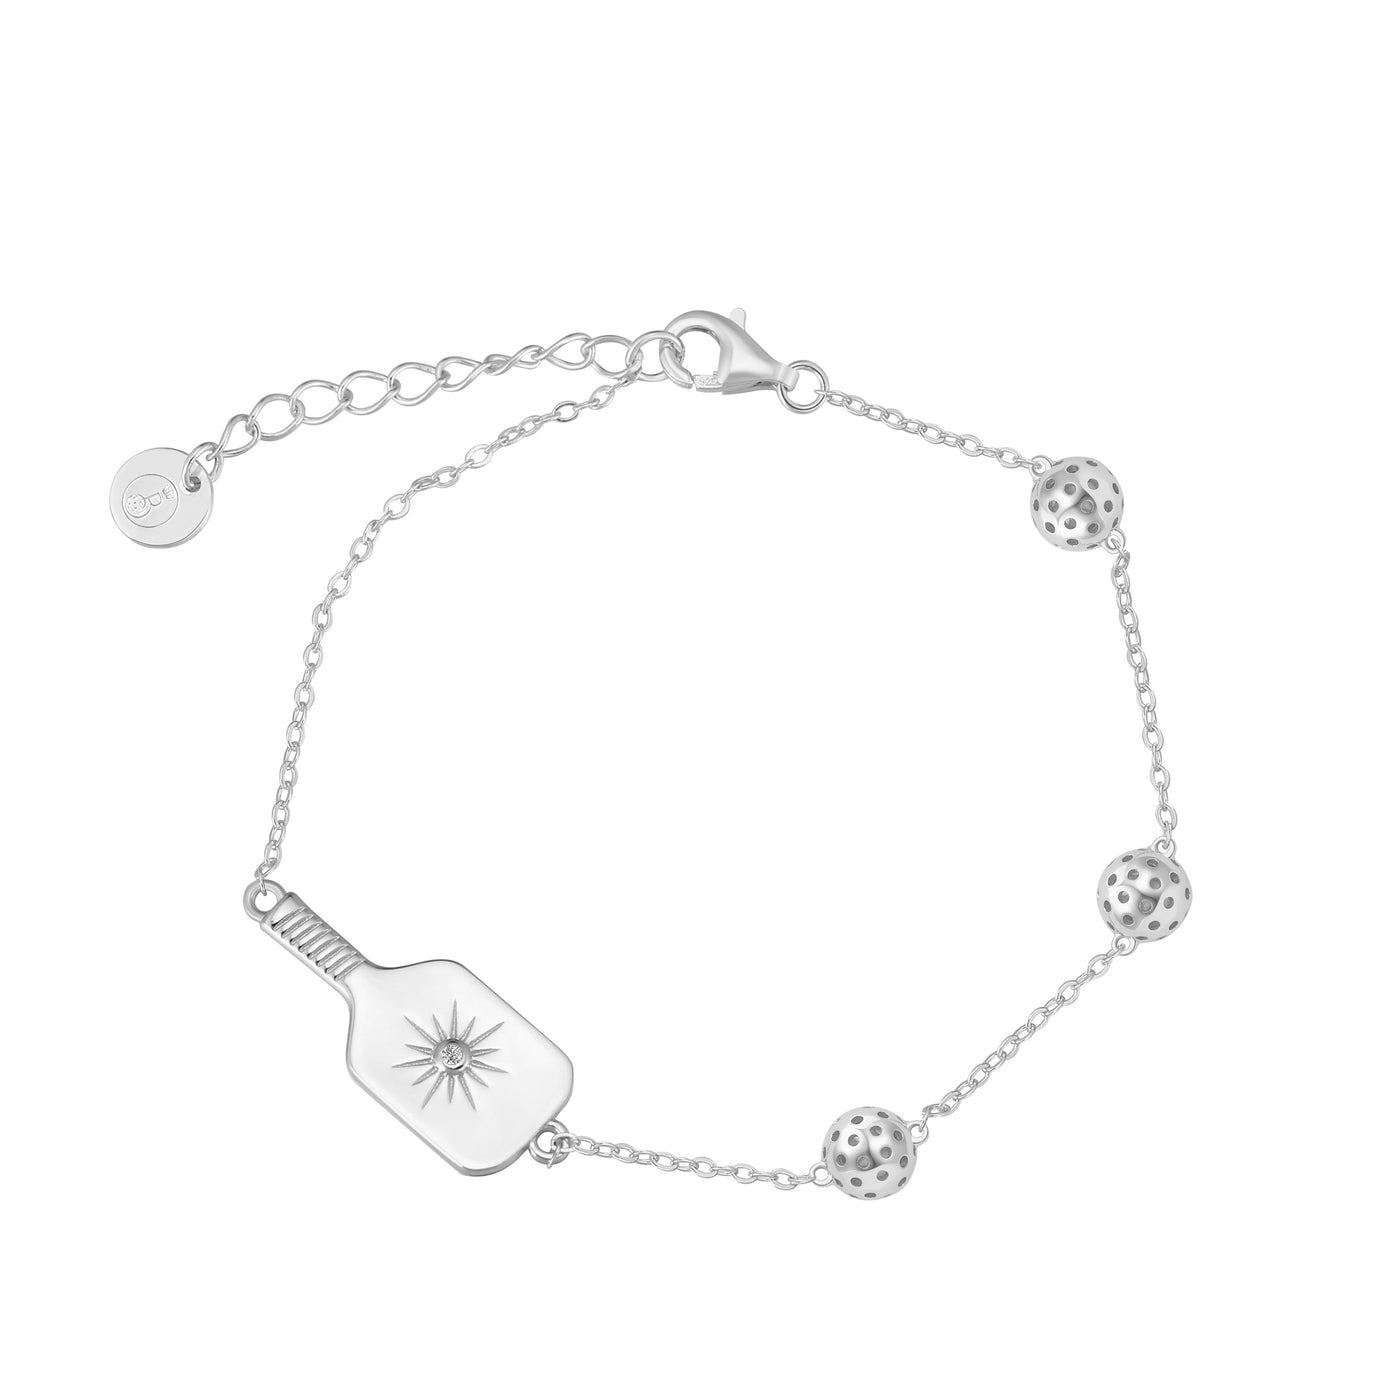 Silver Pickleball Play It Forward Bracelet featuring our "Dainty Dinker" charm front and center with three tiny pickleballs around it. Made from sustainably sourced sterling silver with a protective rhodium plating.